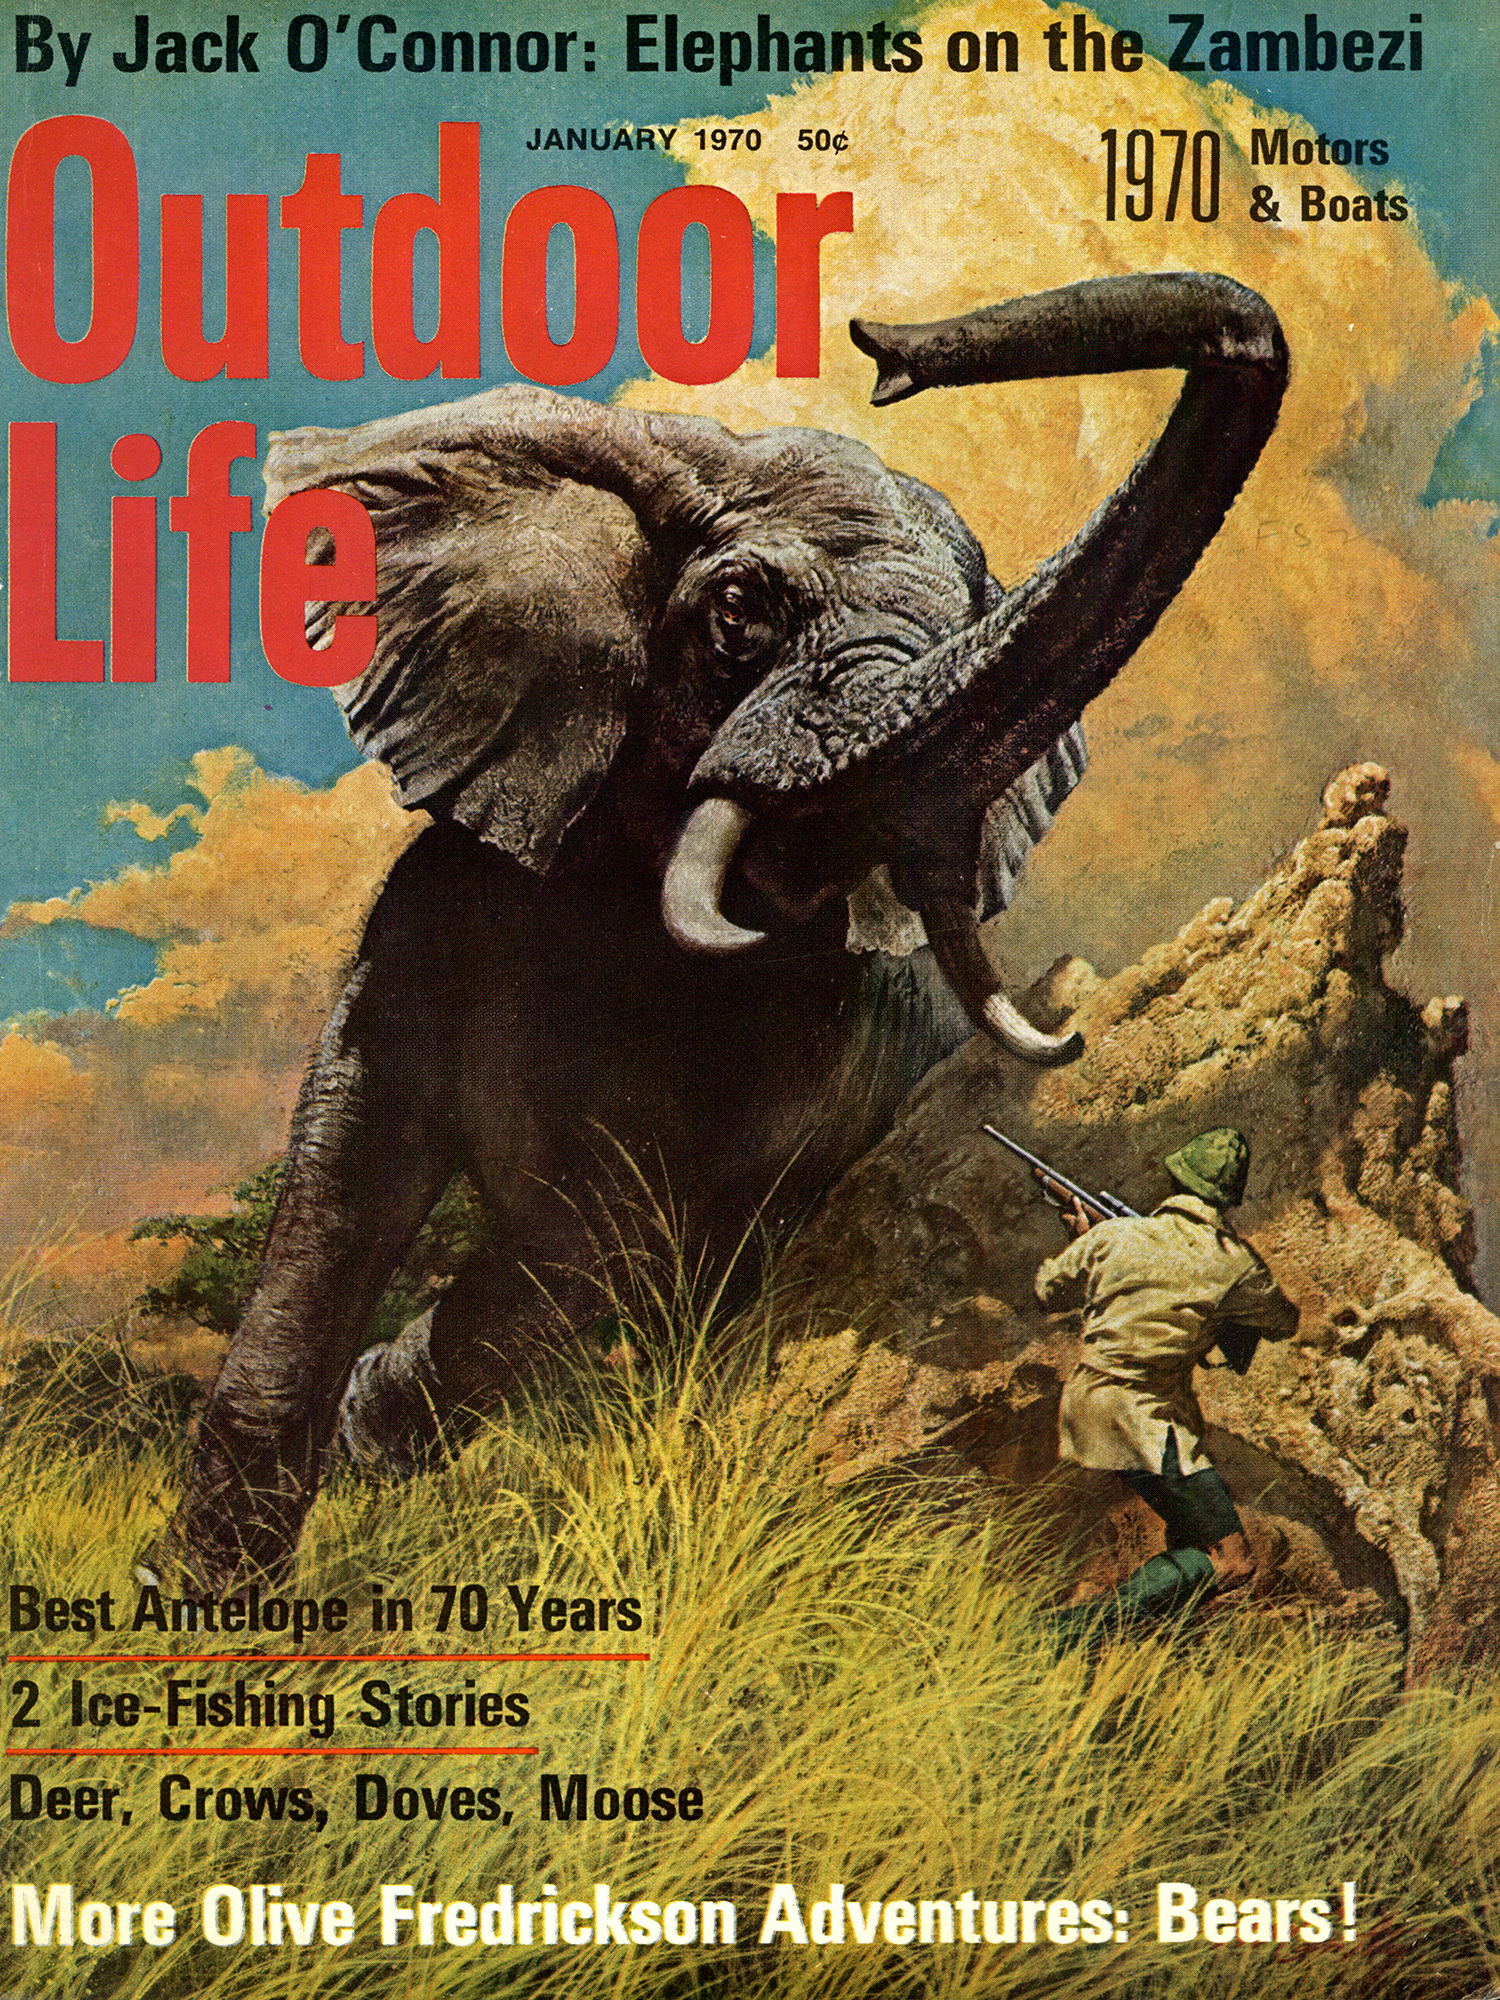 January 1970: Many of Jack O’Connor’s stories were illustrated for the covers.